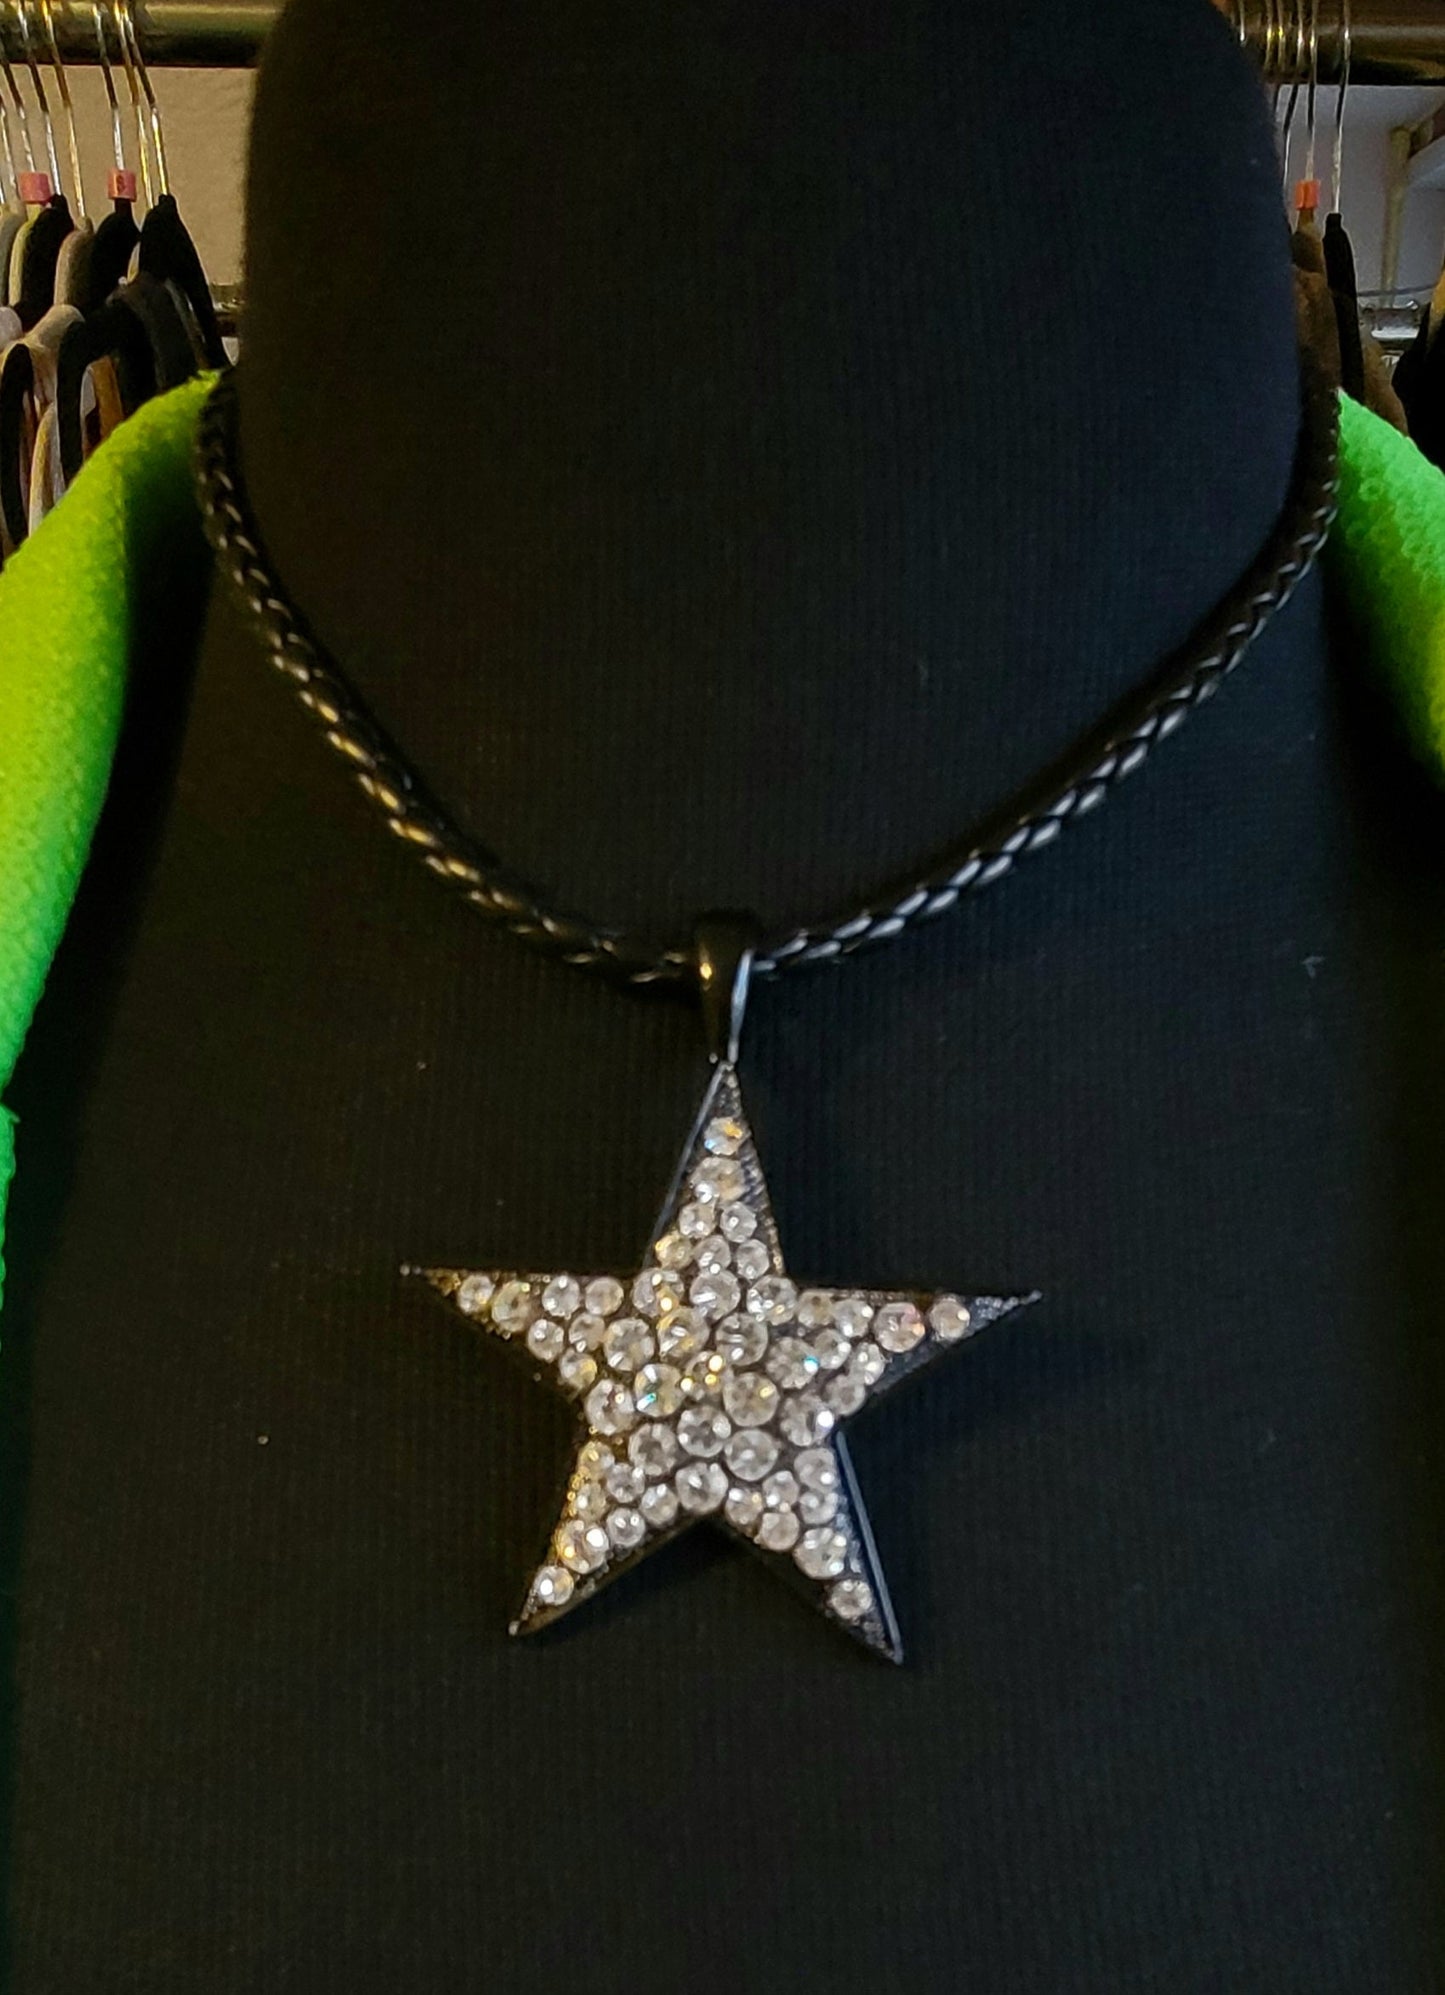 Rhinestone Star Necklace choice of colors